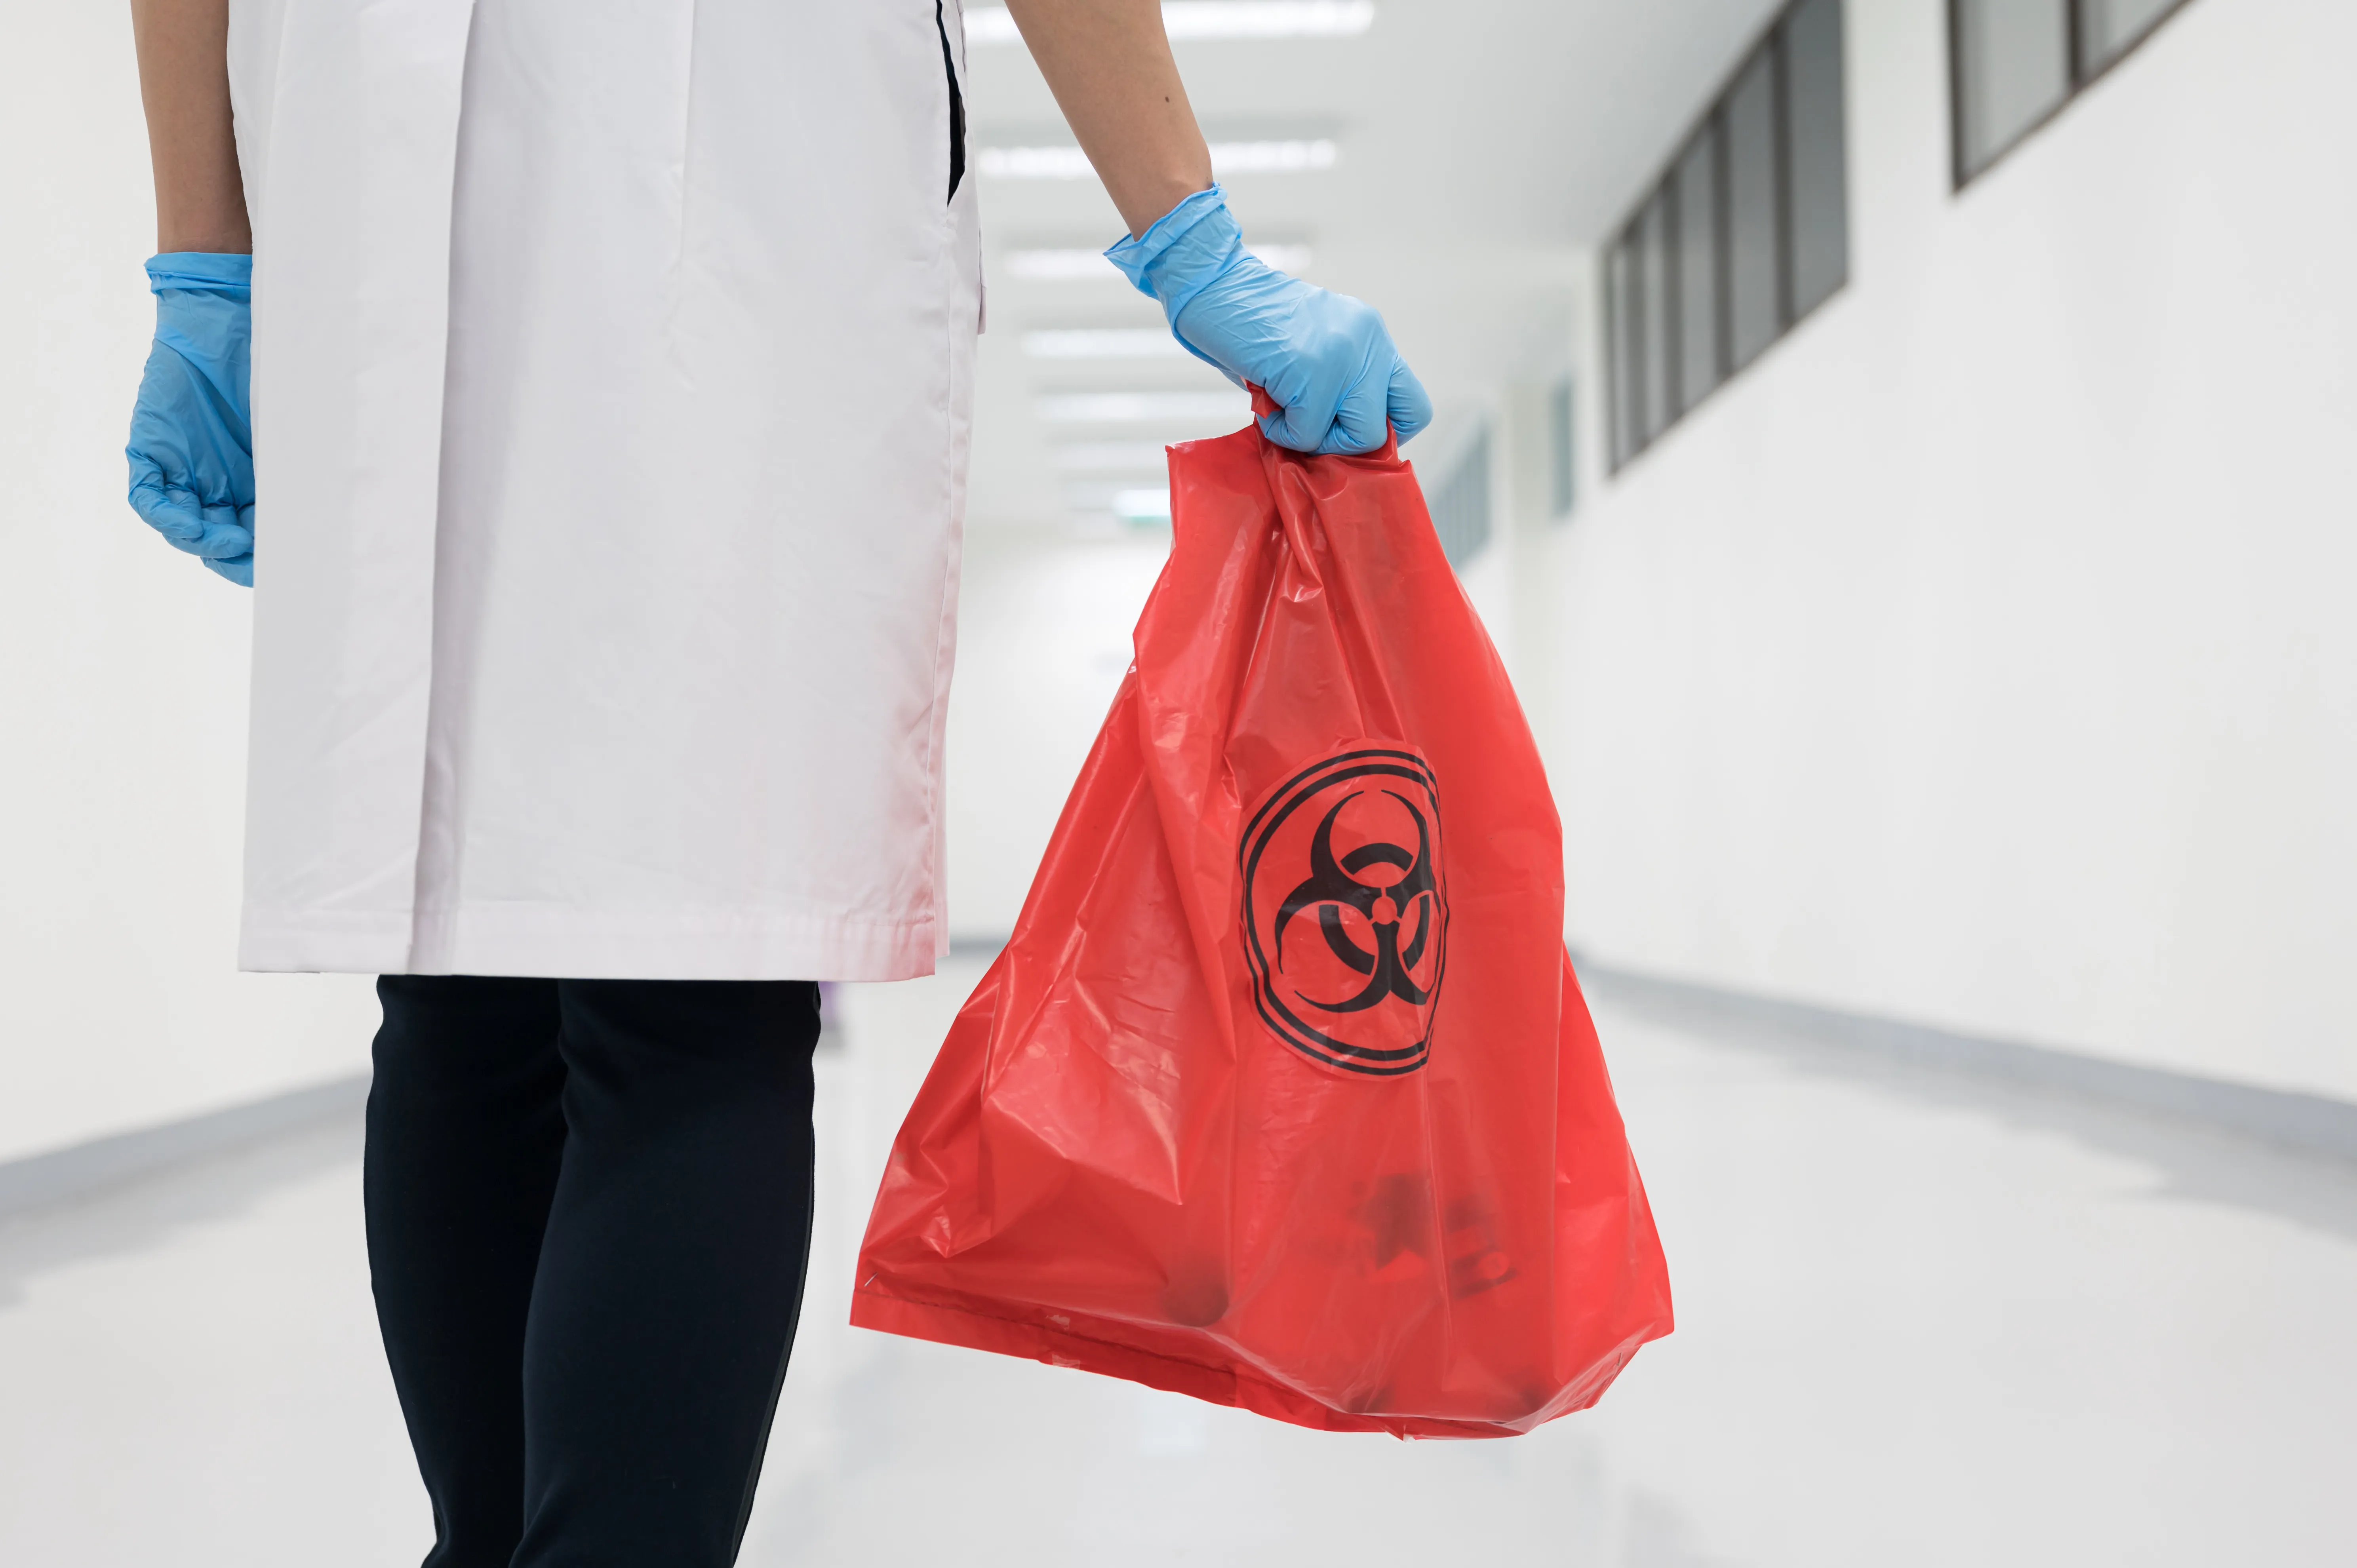 How To Protect Yourself From Bloodborne Pathogens